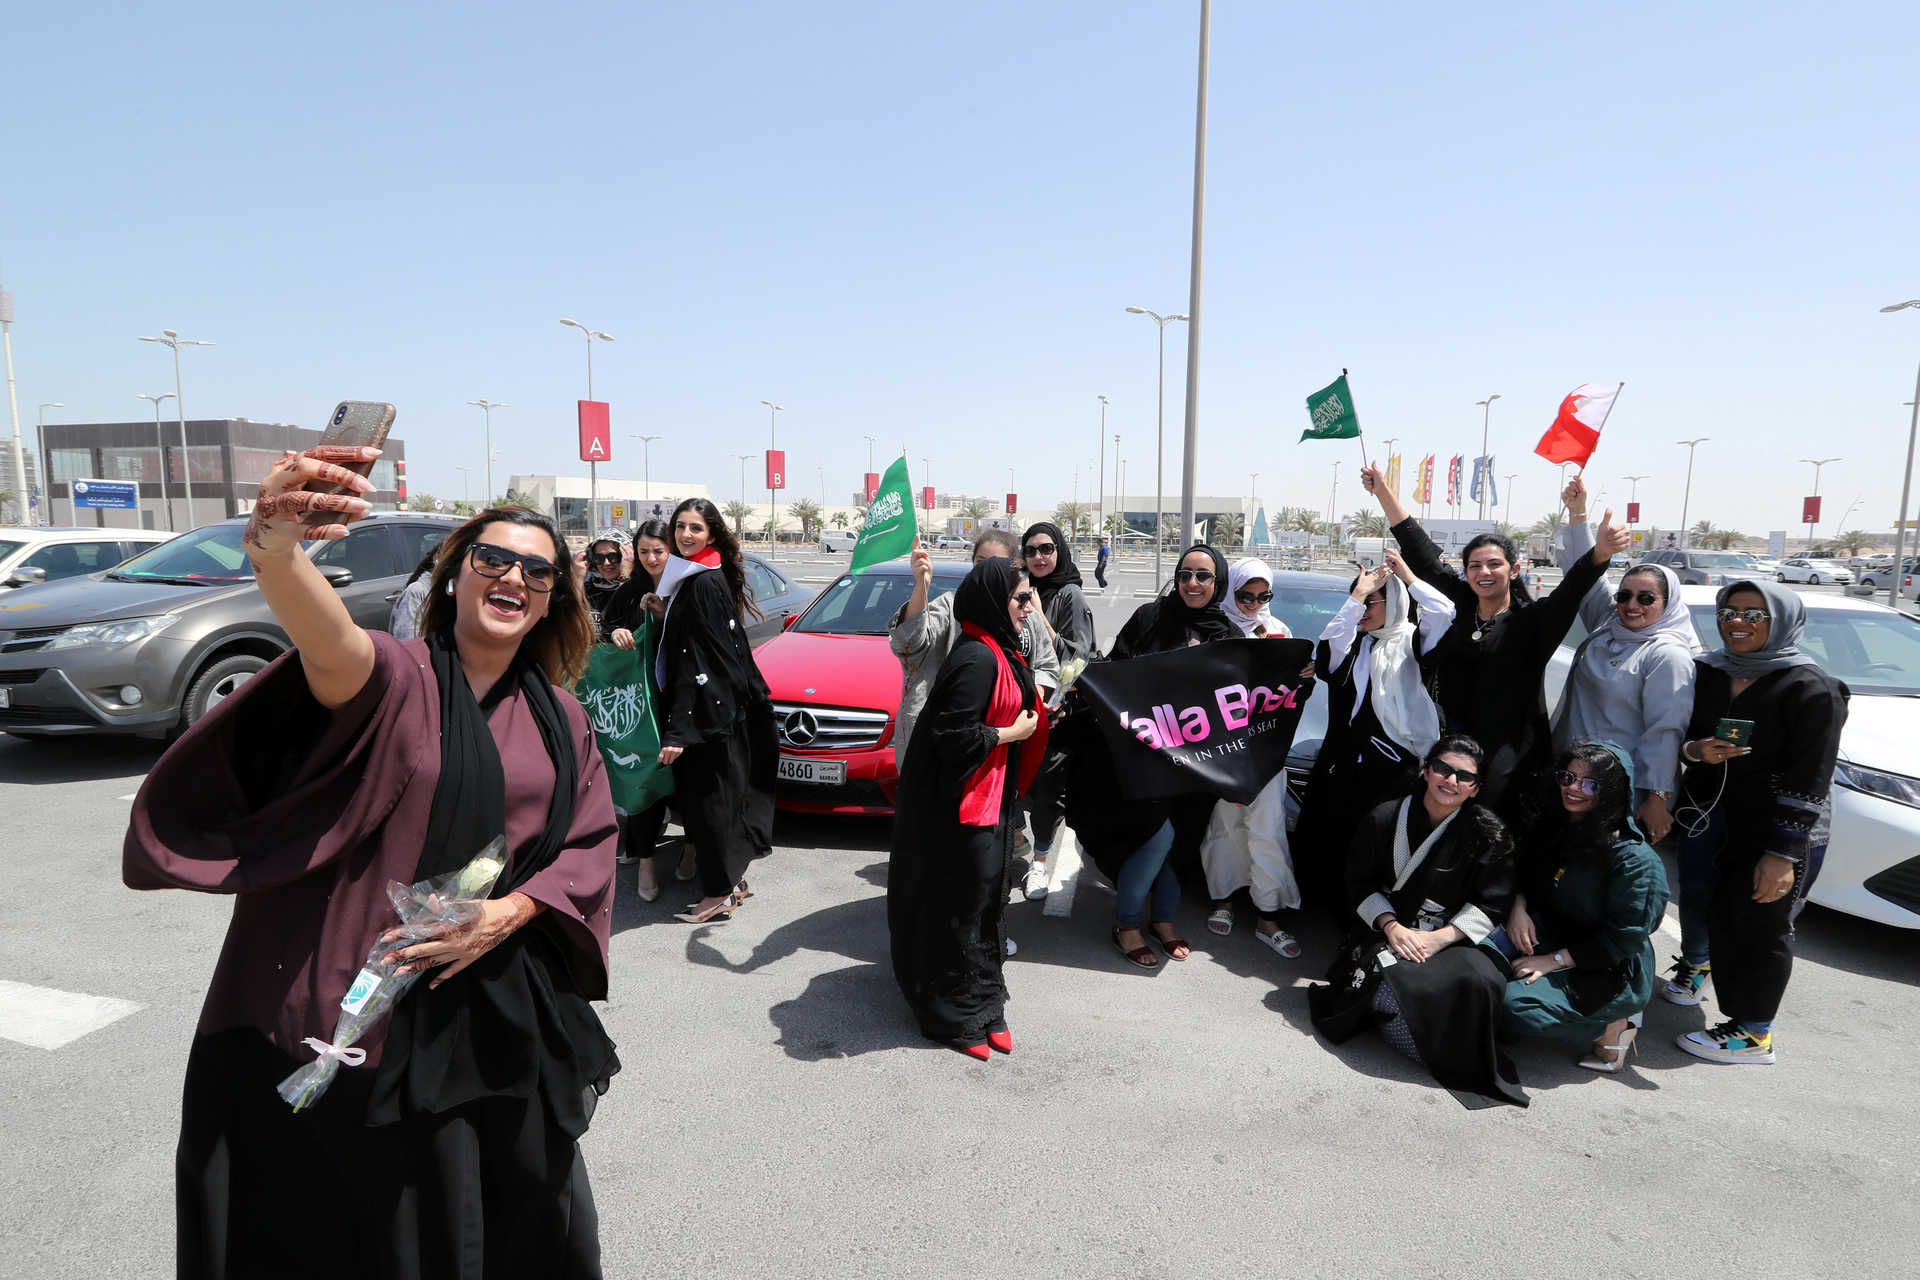 Bahraini woman Eman Mohammed takes a selfie with her phone as she celebrates with Saudi and Bahraini women the lifting of the driving ban on women, in east Saudi Arabia